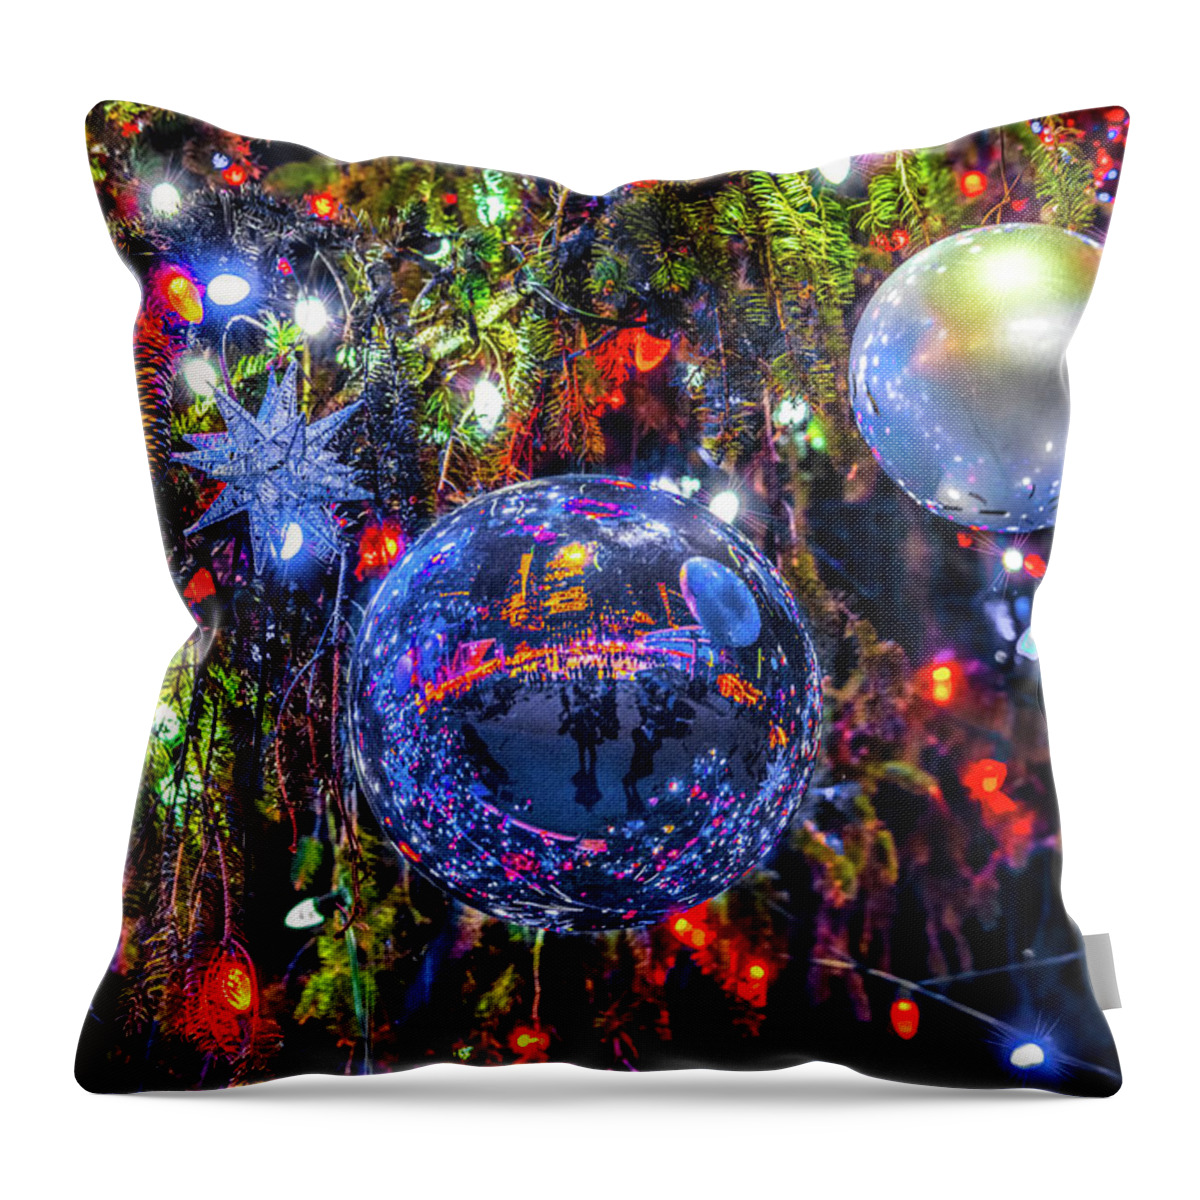 Christmas Throw Pillow featuring the photograph Holiday Tree Ornaments by Chris Lord